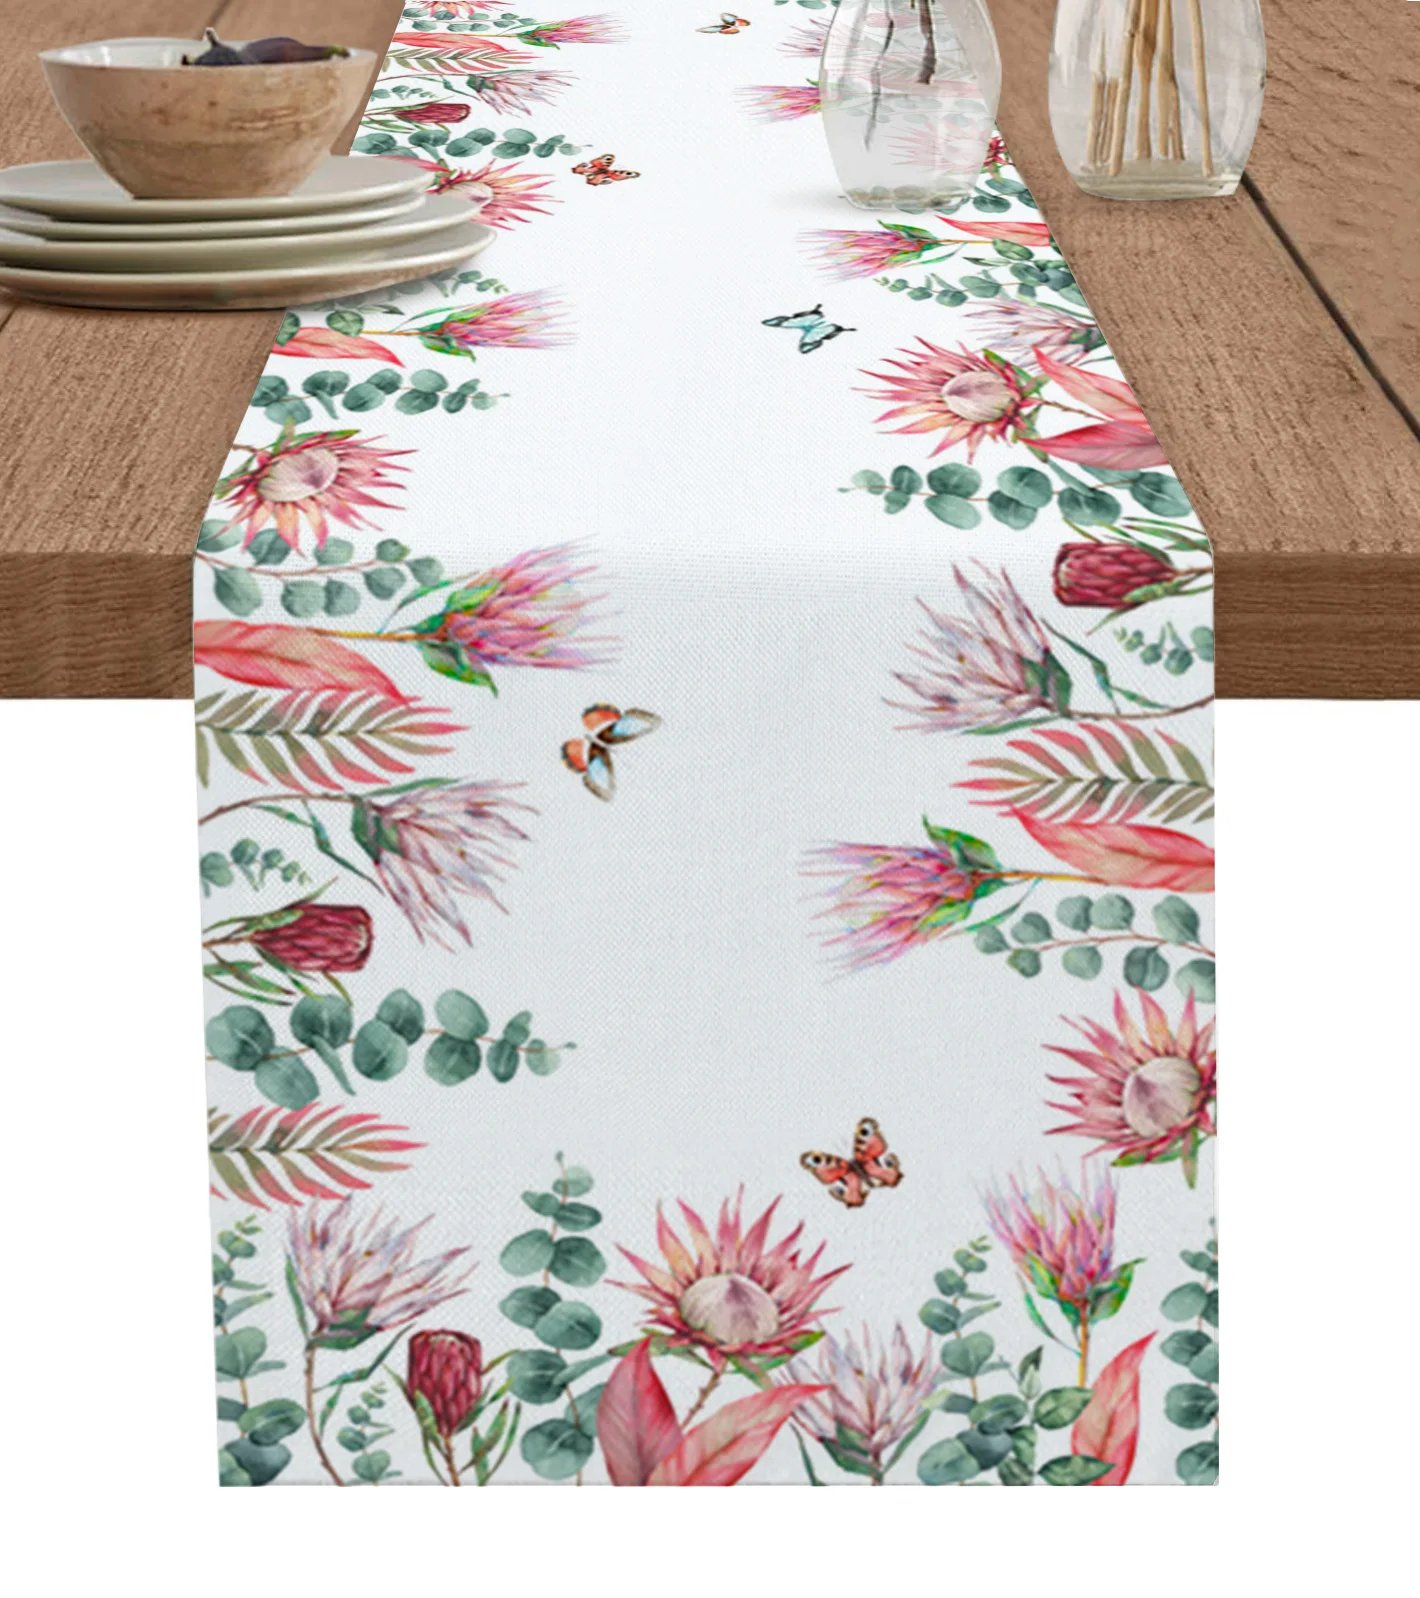 

Idyllic Tropical Plants Flowers Butterflies Table Runner Kitchen Dining Table Cover Wedding Party Decor Cotton Linen Tablecloth